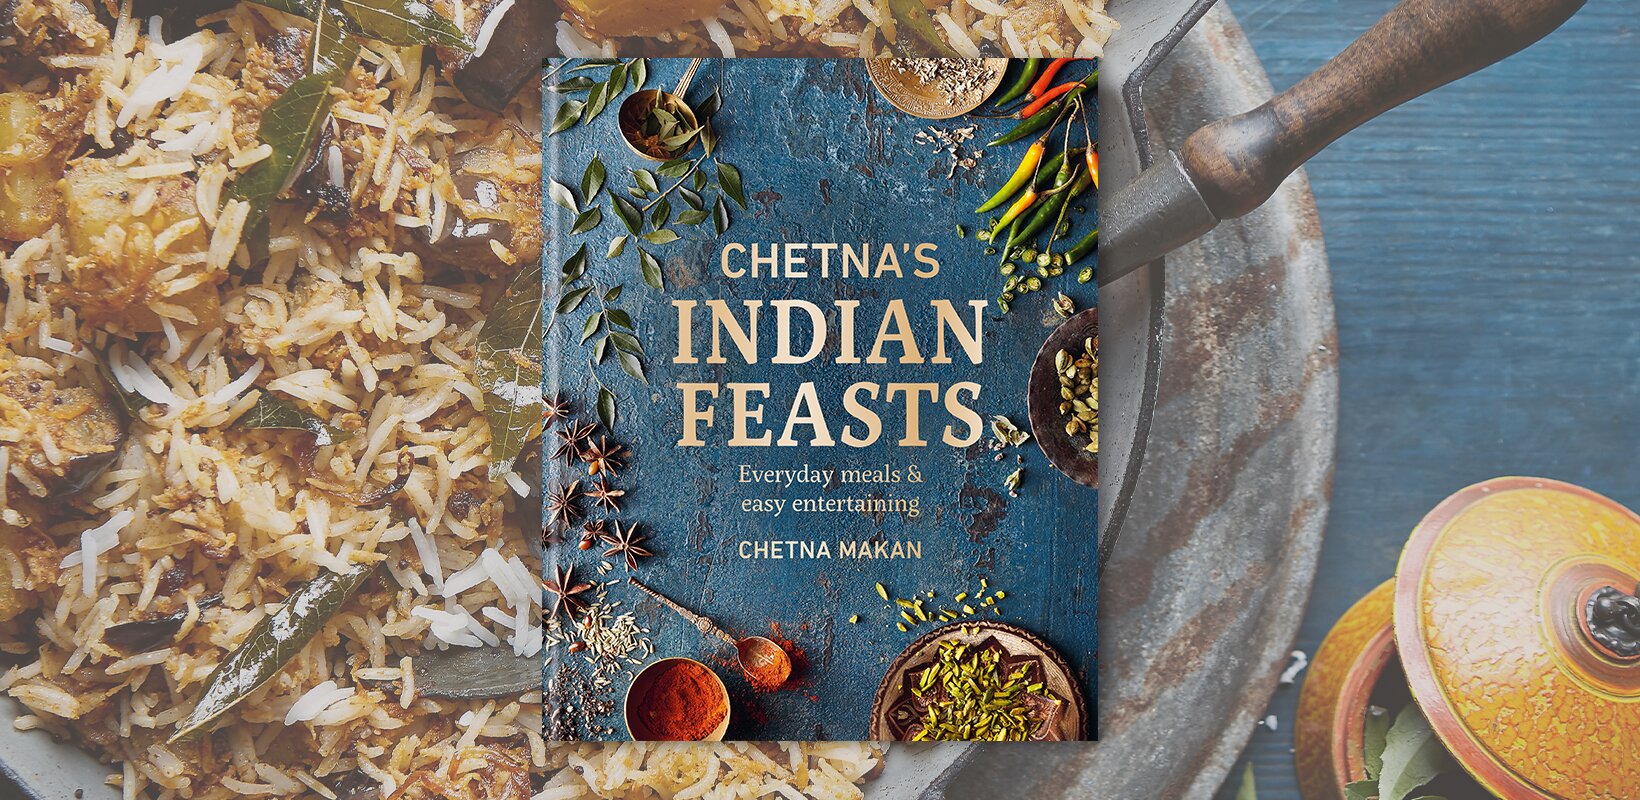 Book review: Chetna’s Indian Feasts by Chetna Makan